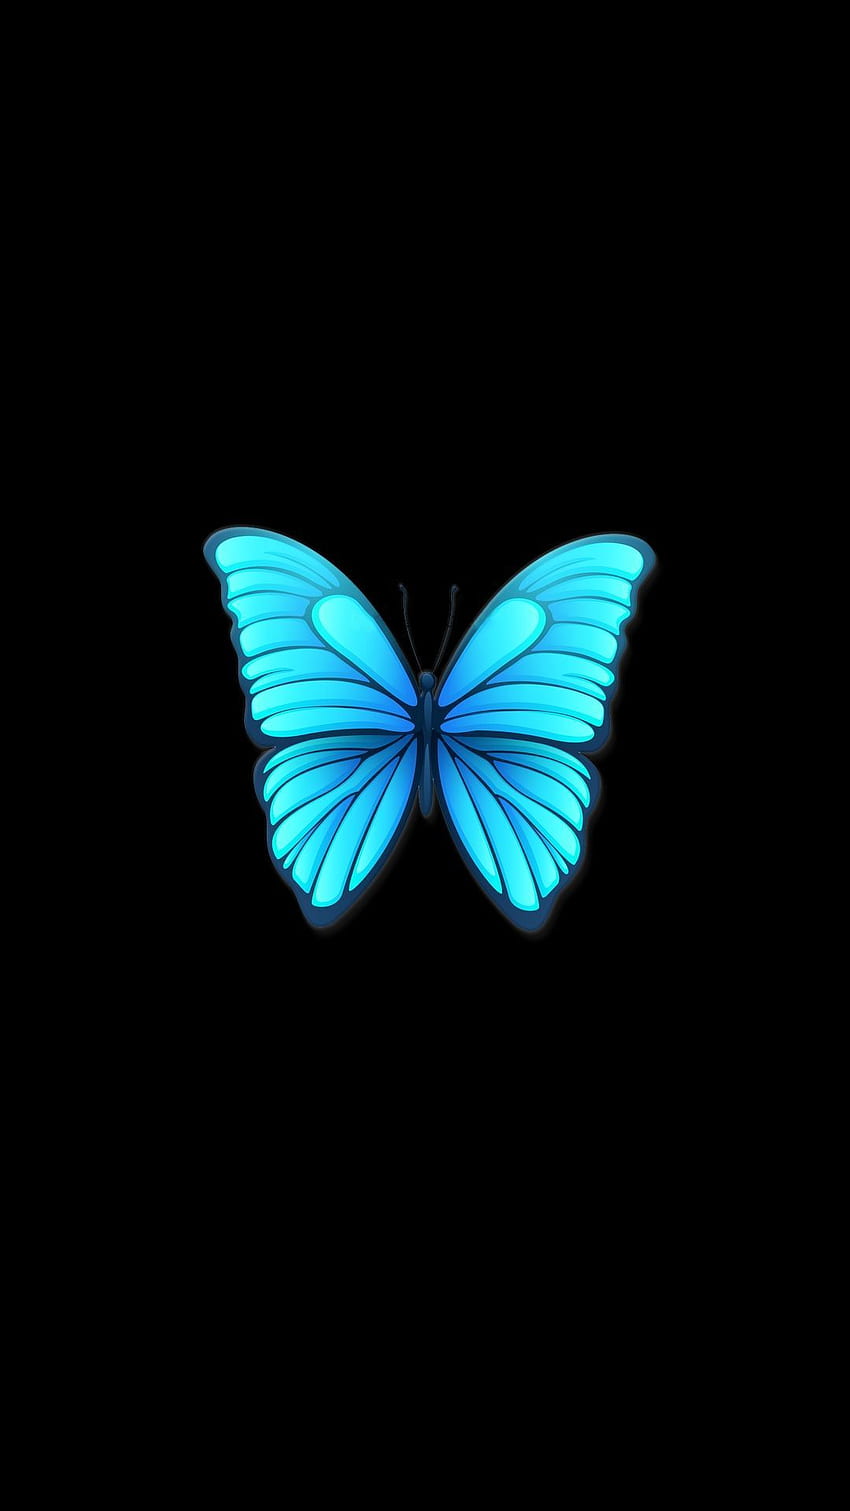 Amoled 14. Butterfly iphone, Butterfly , Teal and black HD phone wallpaper